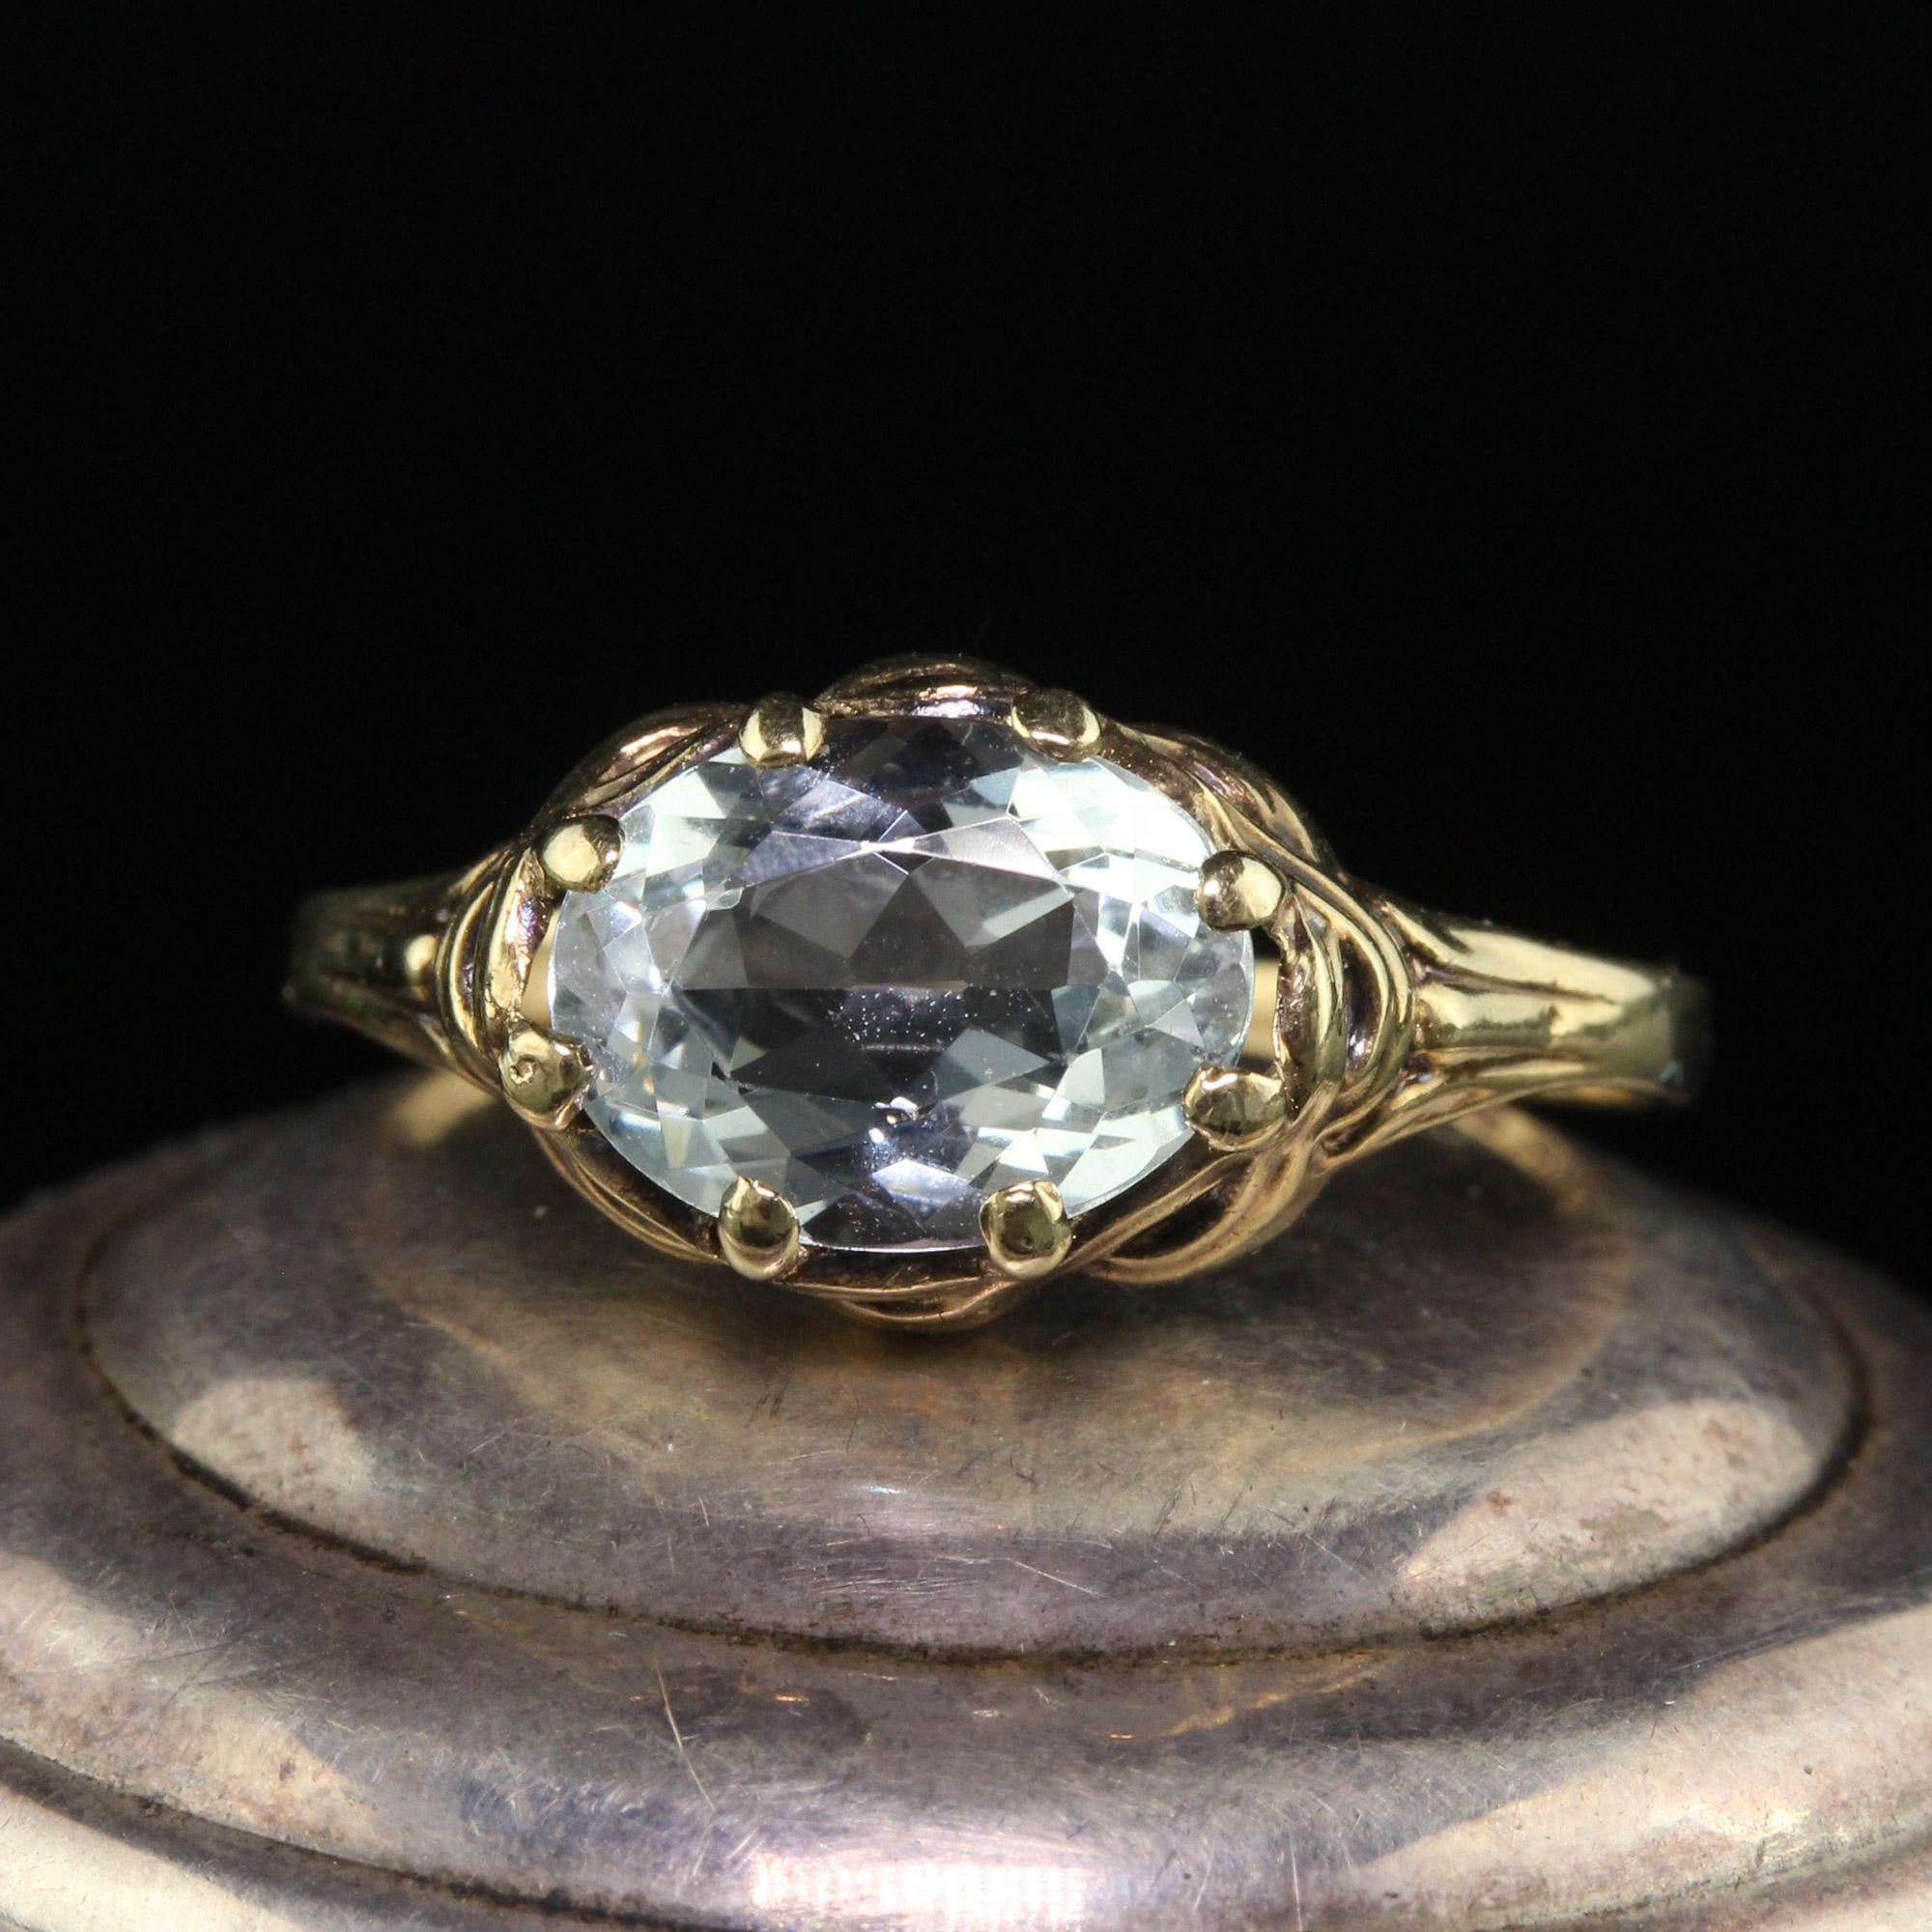 Beautiful Antique Art Deco 8K Yellow Gold Aquamarine Solitaire Vine Design Ring. This beautiful ring is crafted in 8k yellow gold. The center holds a light blue aquamarine that is set in a beautiful Art Deco mounting that has a vine design going